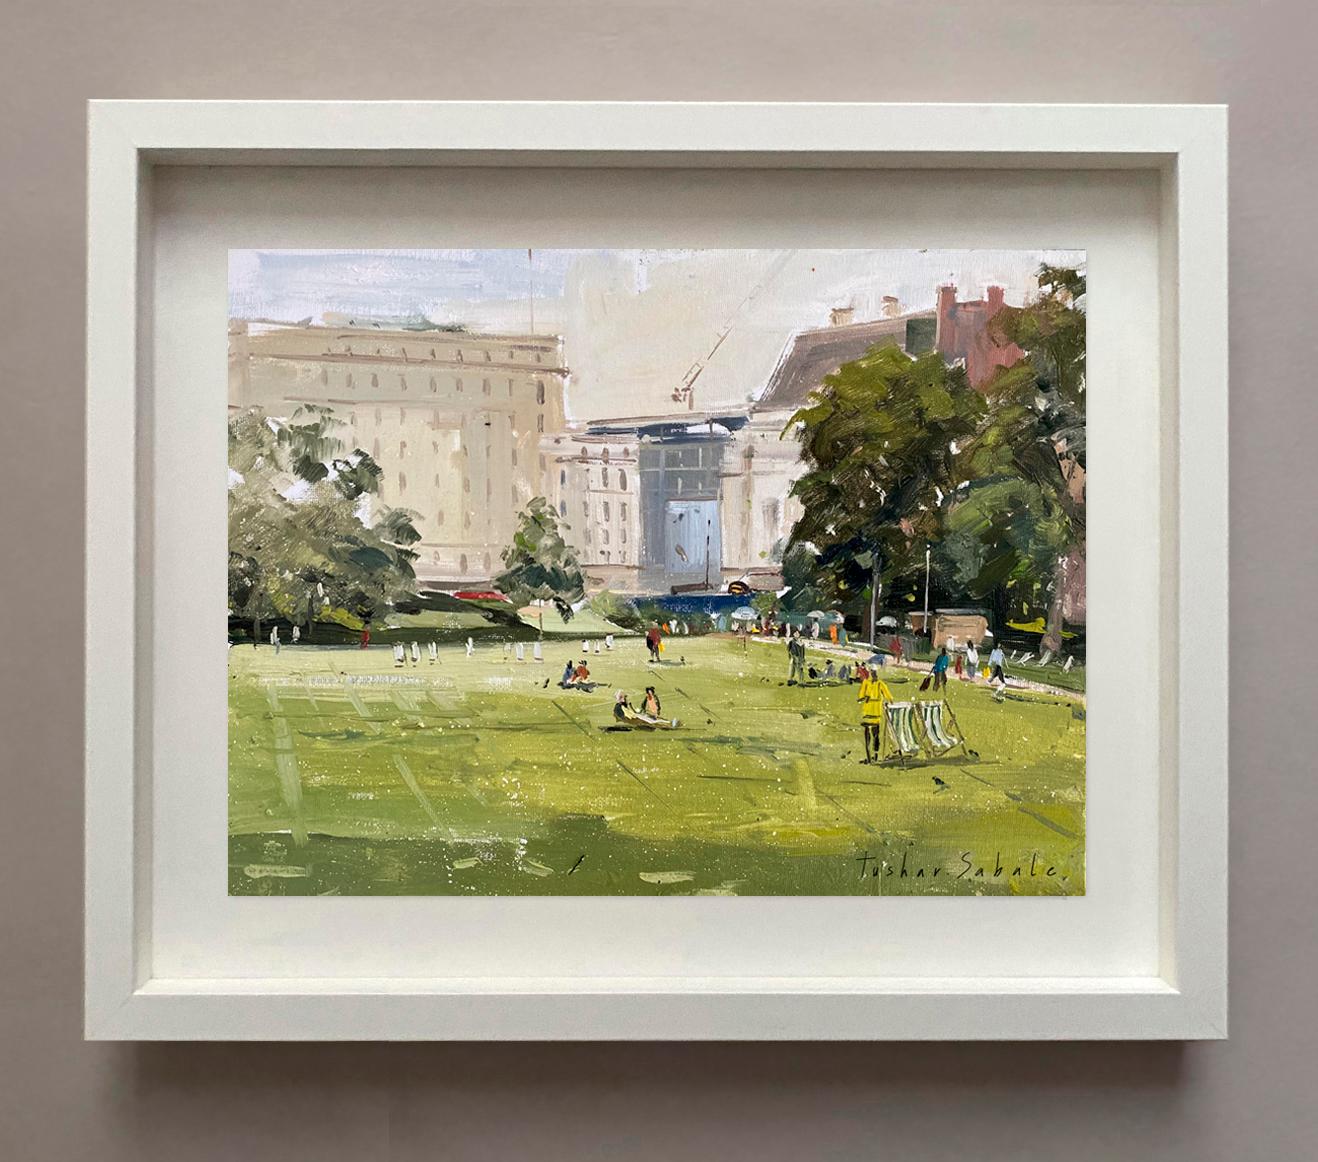 Painted on a summer day at Green park, London- Plein air, All prima!
Discover new works by Tushar Sabale available to buy online and in our art gallery at Wychwood Art. Tushar Sabale is an award-winning, Indian born, British artist who paints en